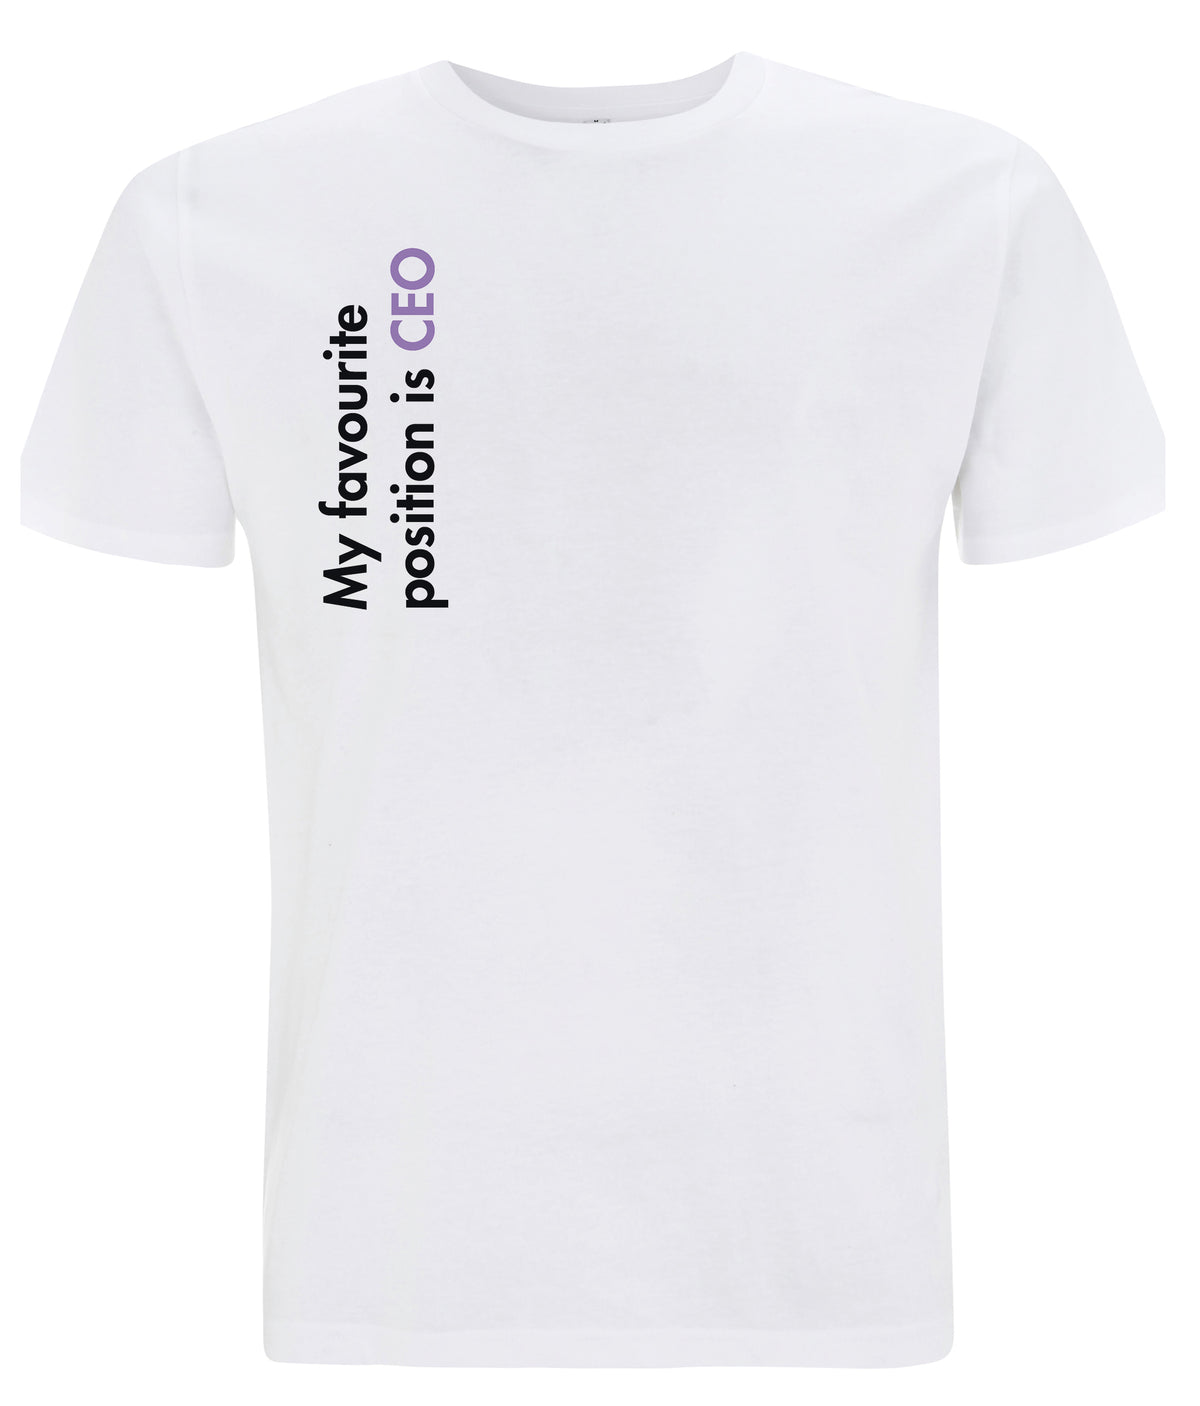 My Favourite Position Is CEO Organic Feminist T Shirt White